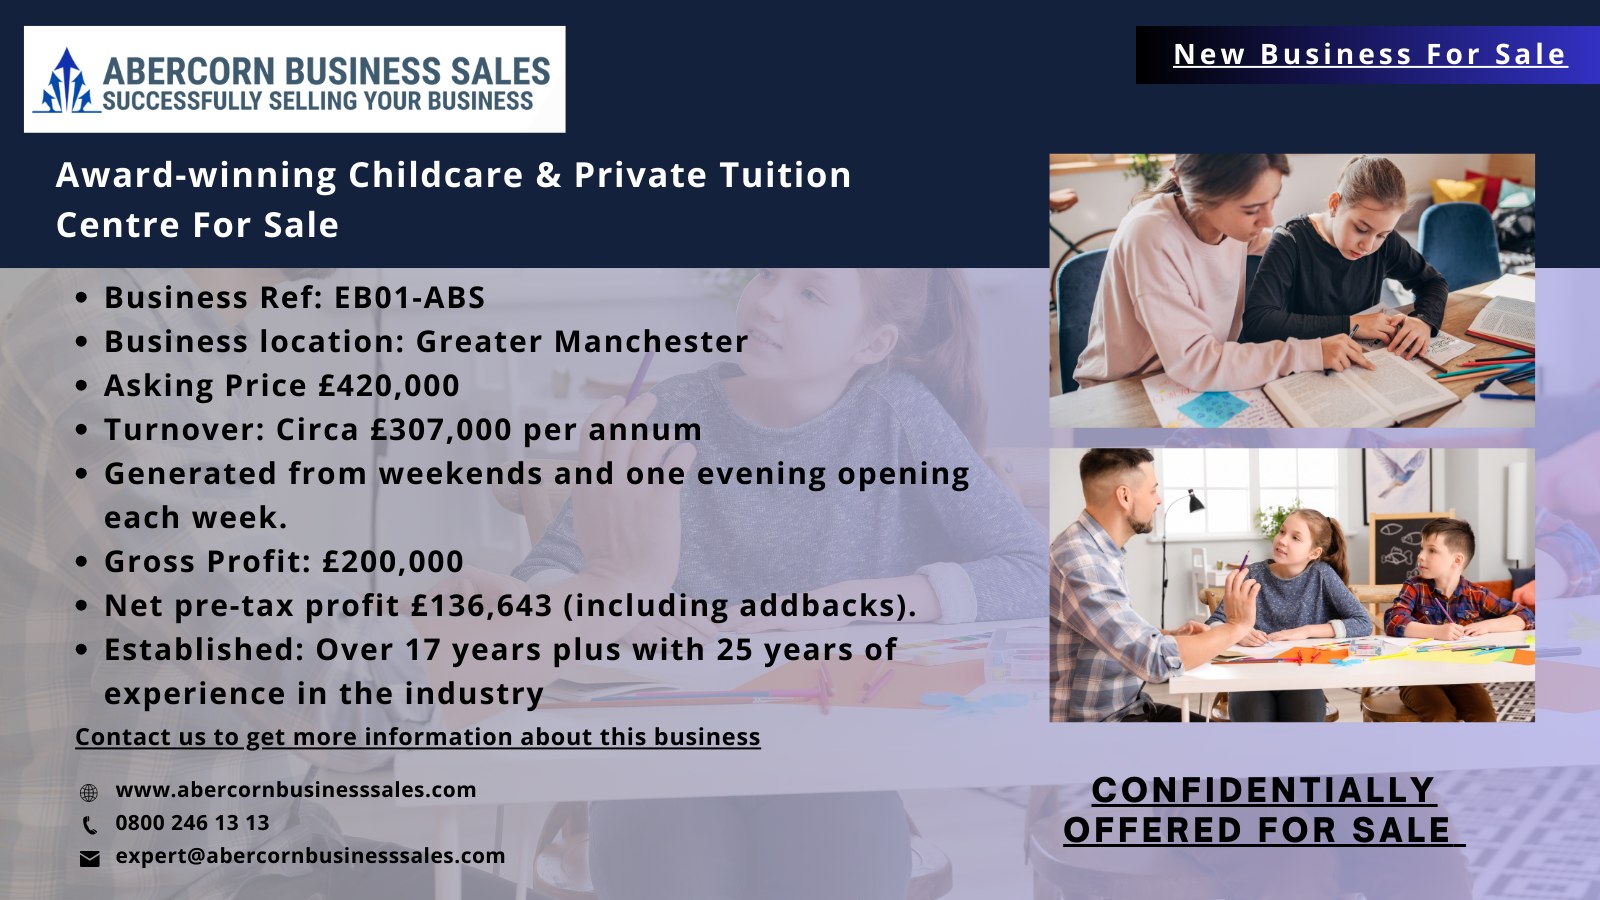 EB01-ABS - Award-winning Childcare & Private Tuition Centre for Sale